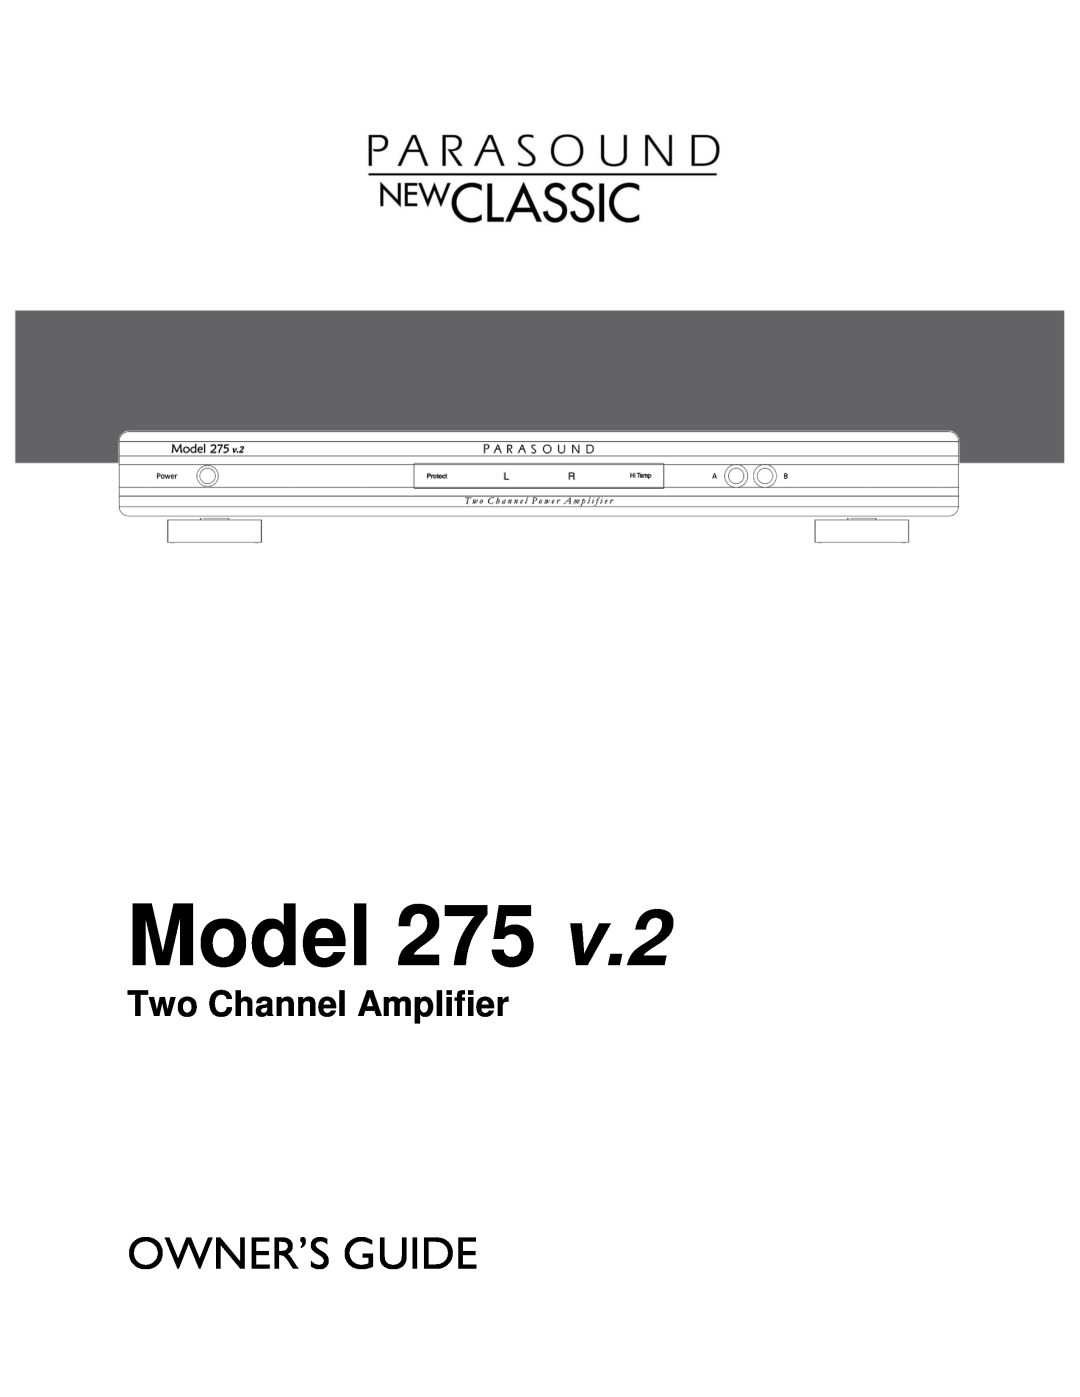 Parasound 275 V.2 manual Model, Owner’S Guide, Two Channel Amplifier 